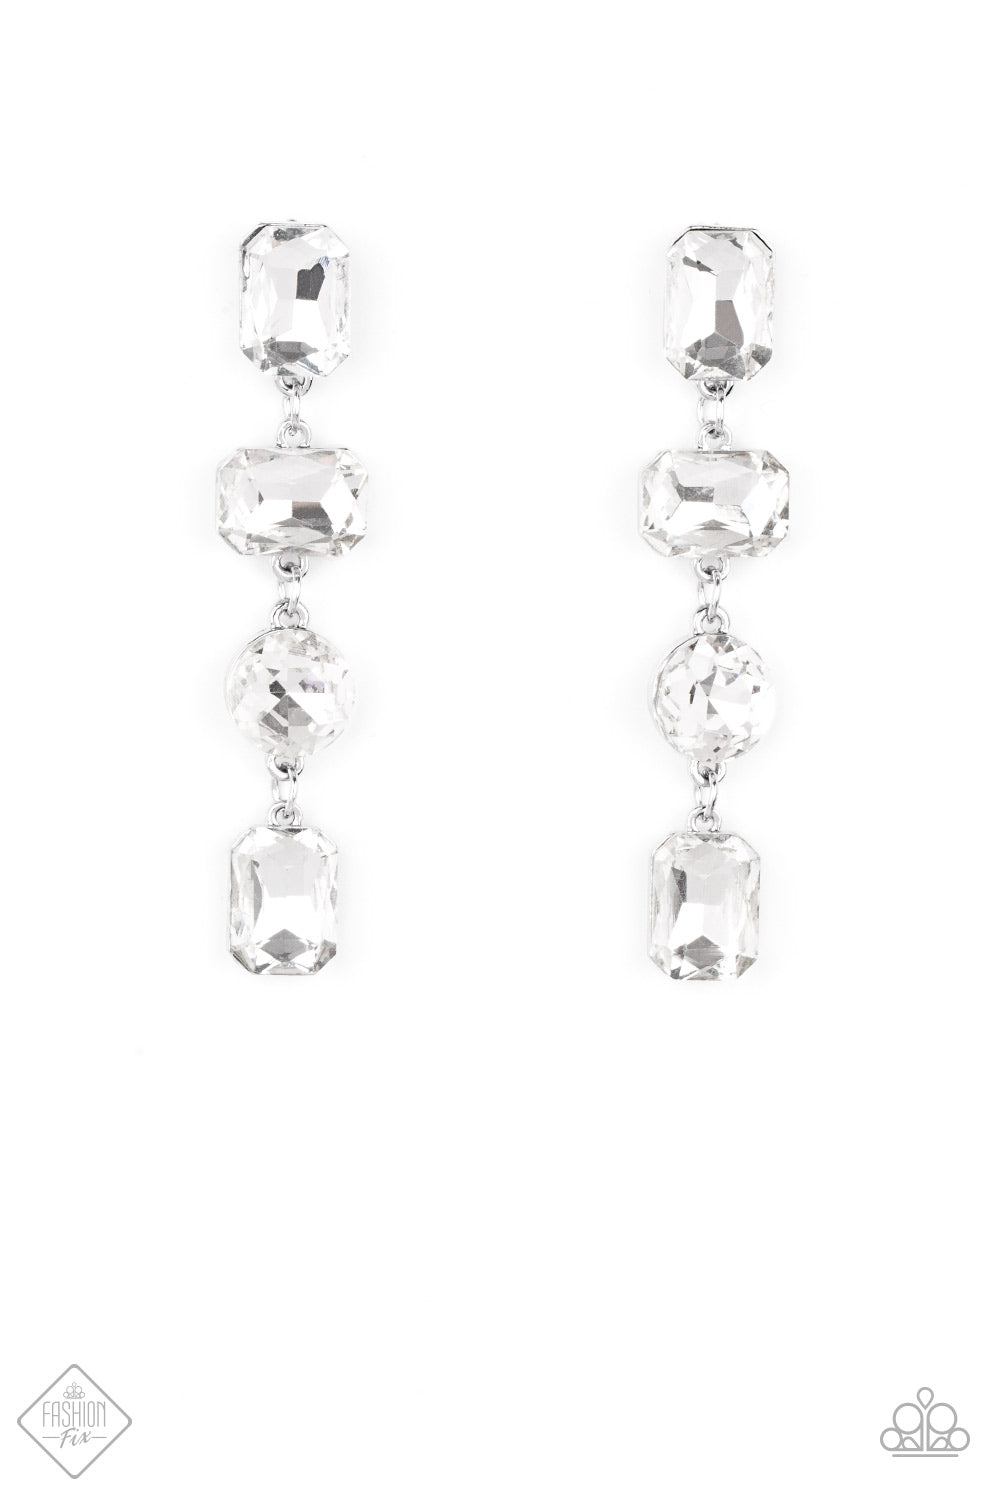 A strand of oversized round, teardrop, and emerald cut rhinestones trickles from the ear, creating a jaw-dropping chandelier. Earring attaches to a standard post earring.  Sold as one pair of post earrings.